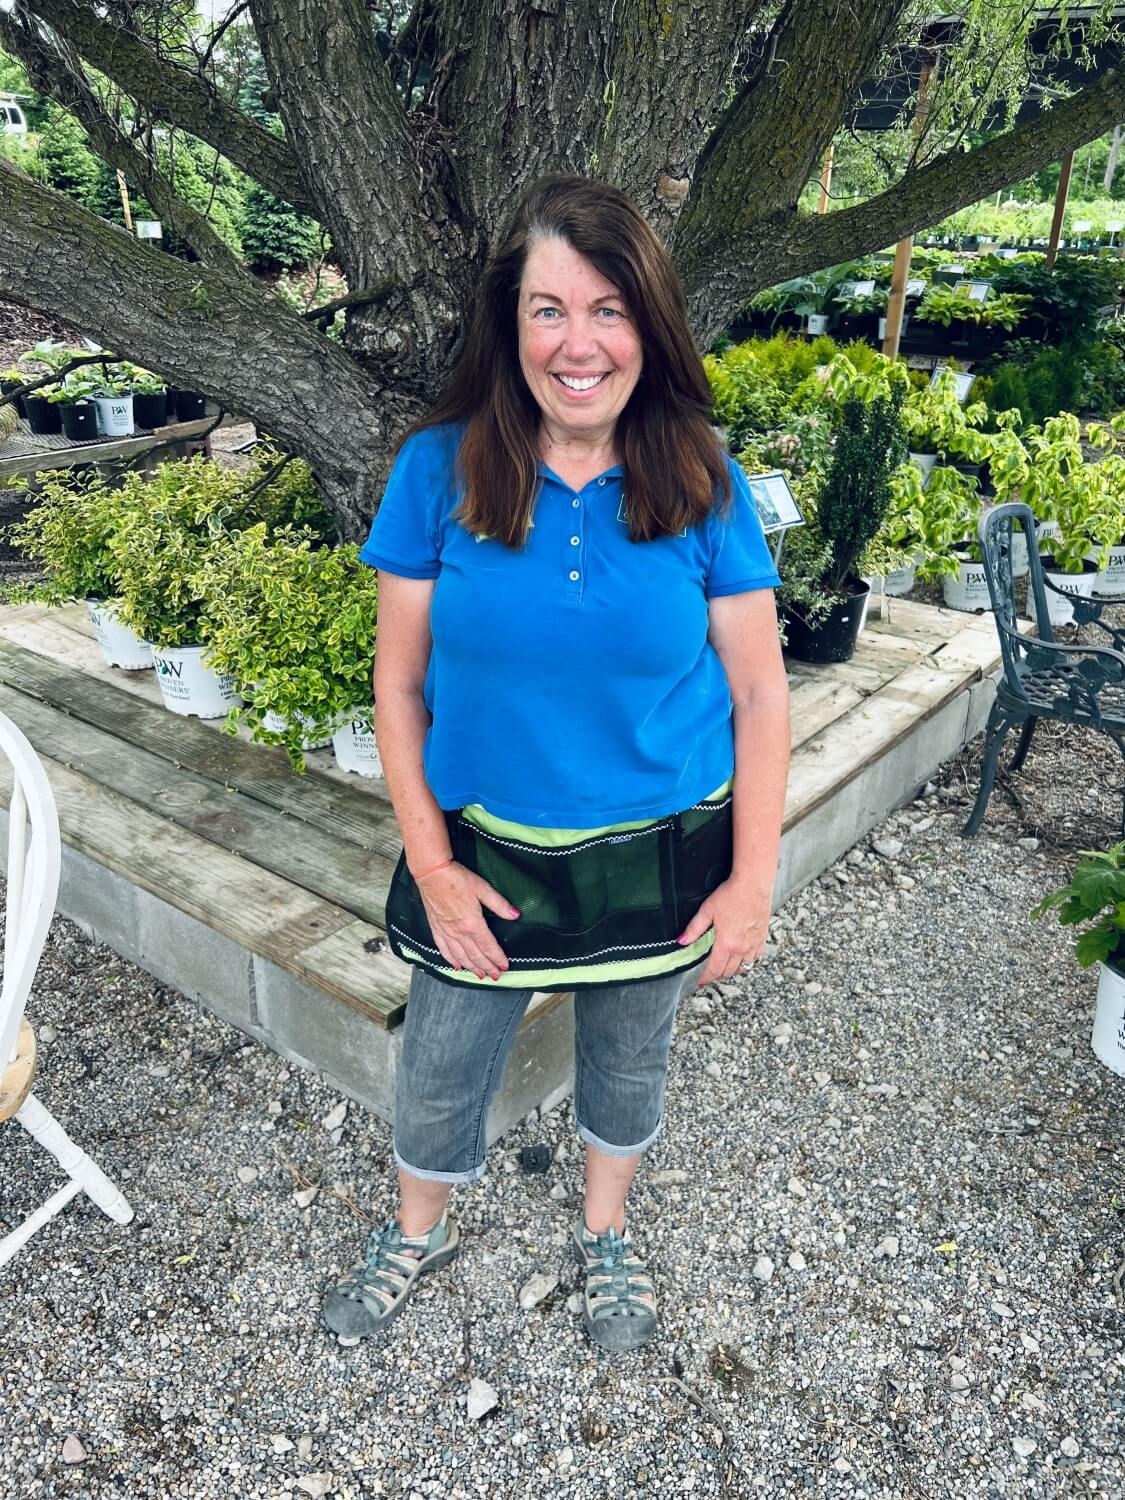 <p>Gail Joined Willow Greenhouse in 2015. Before that she owned her own gardening consulting business for eight years and she was a nurse for thirty-two years! Nick hired her admittedly because she is an amazing asset. Gail loves working at Willow Greenhouse because she loves helping people and learning. She says, you learn so much while you work here it is like a free class everyday.</p>
<p><strong>Fun Fact: She ran two and a half marathons at age 50.</strong></p>